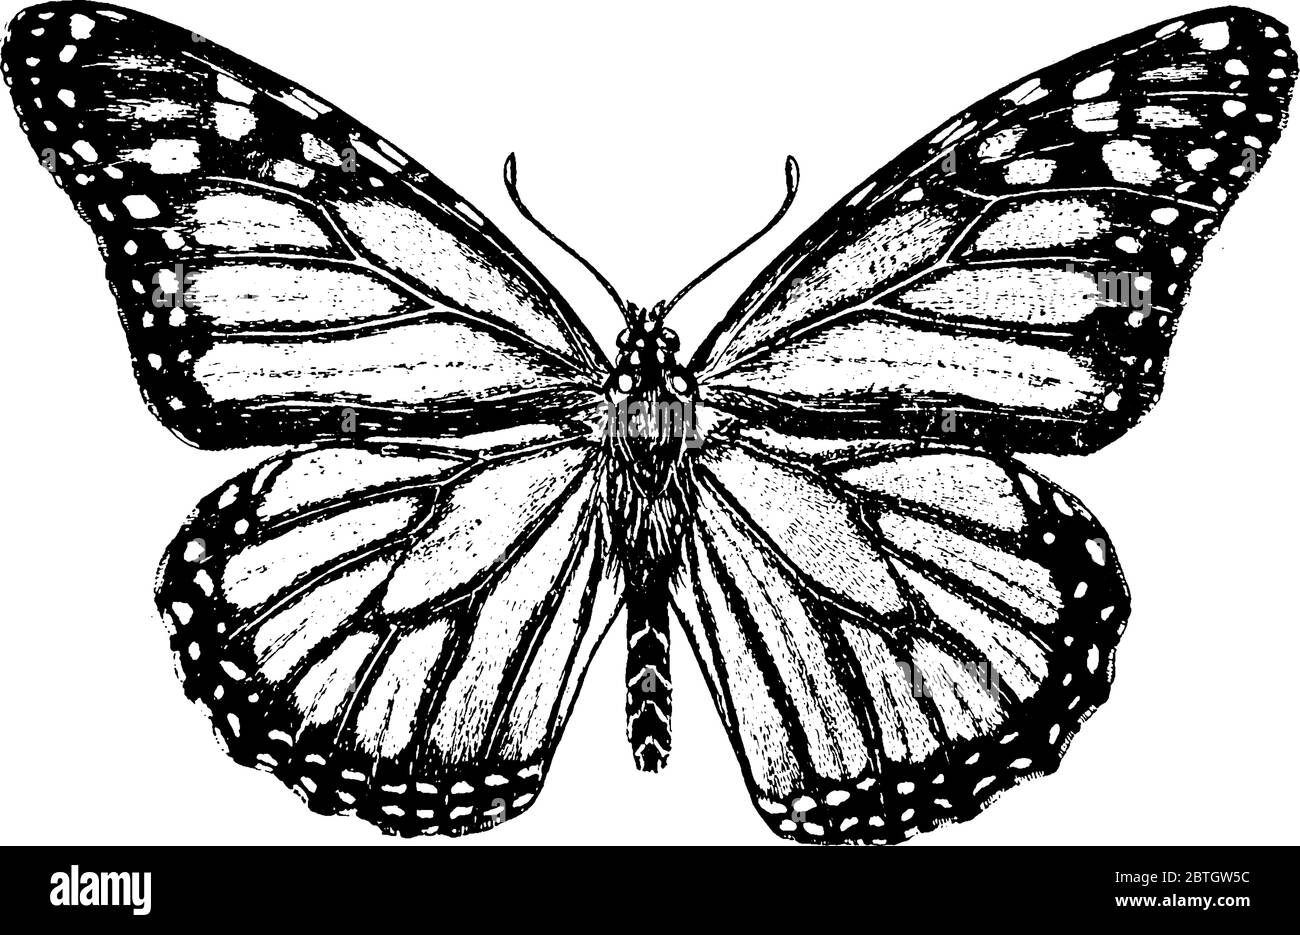 Metamorphosis Drawing Butterfly - Try some thing new,easy tutorial for